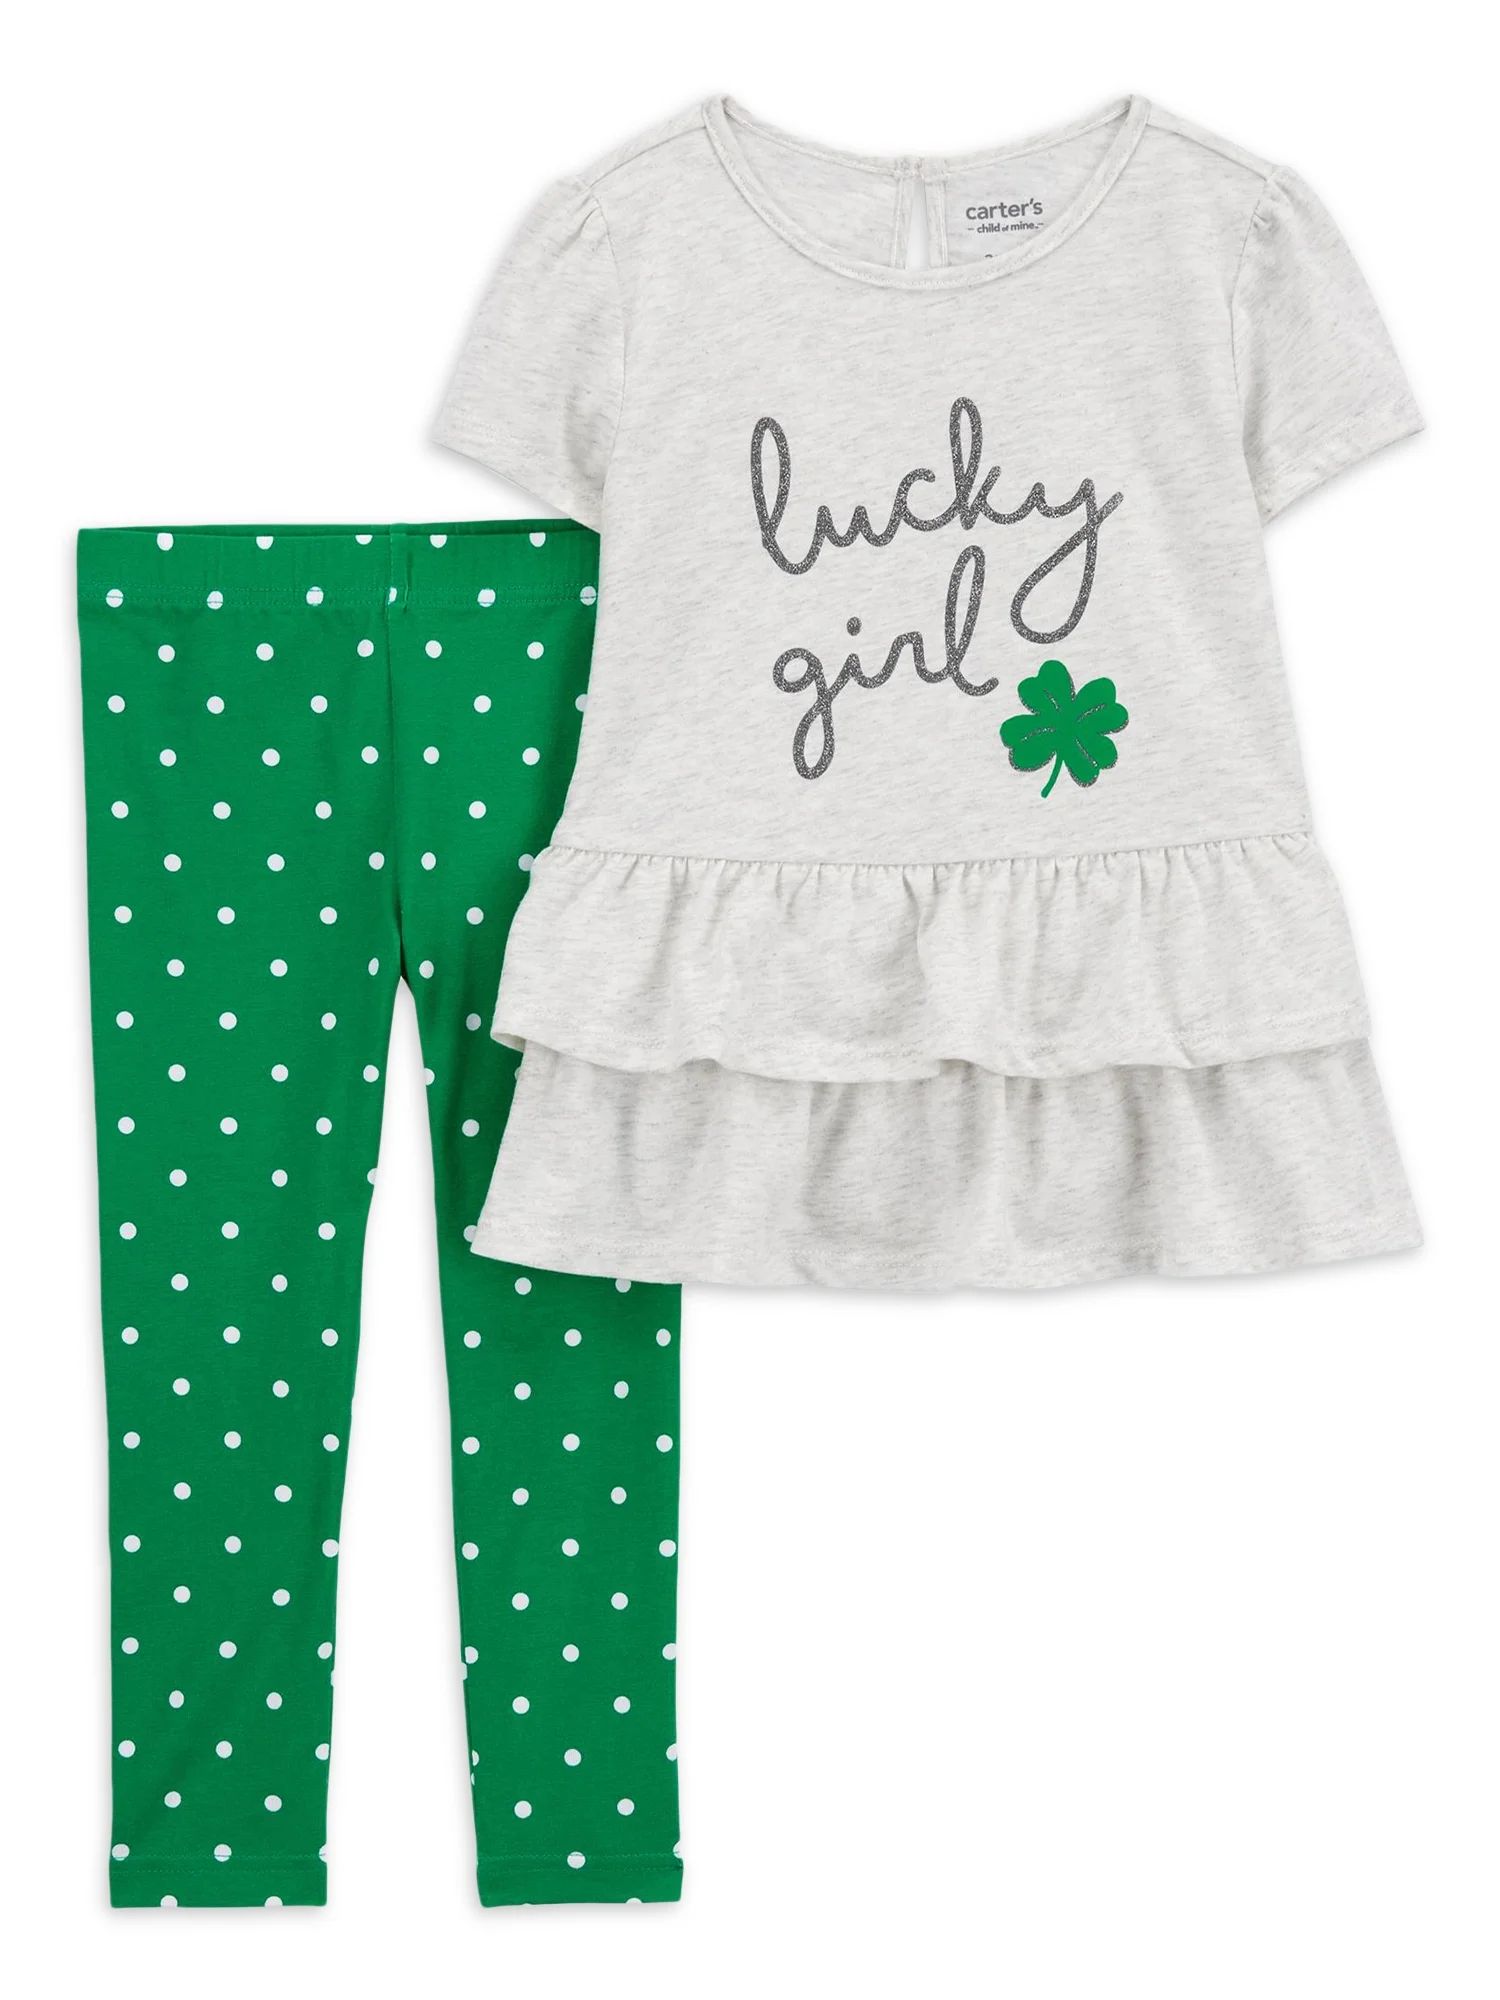 Carter's Child of Mine Toddler Girl St.Patrick's Day Outfit Set, Sizes 12M-5T | Walmart (US)